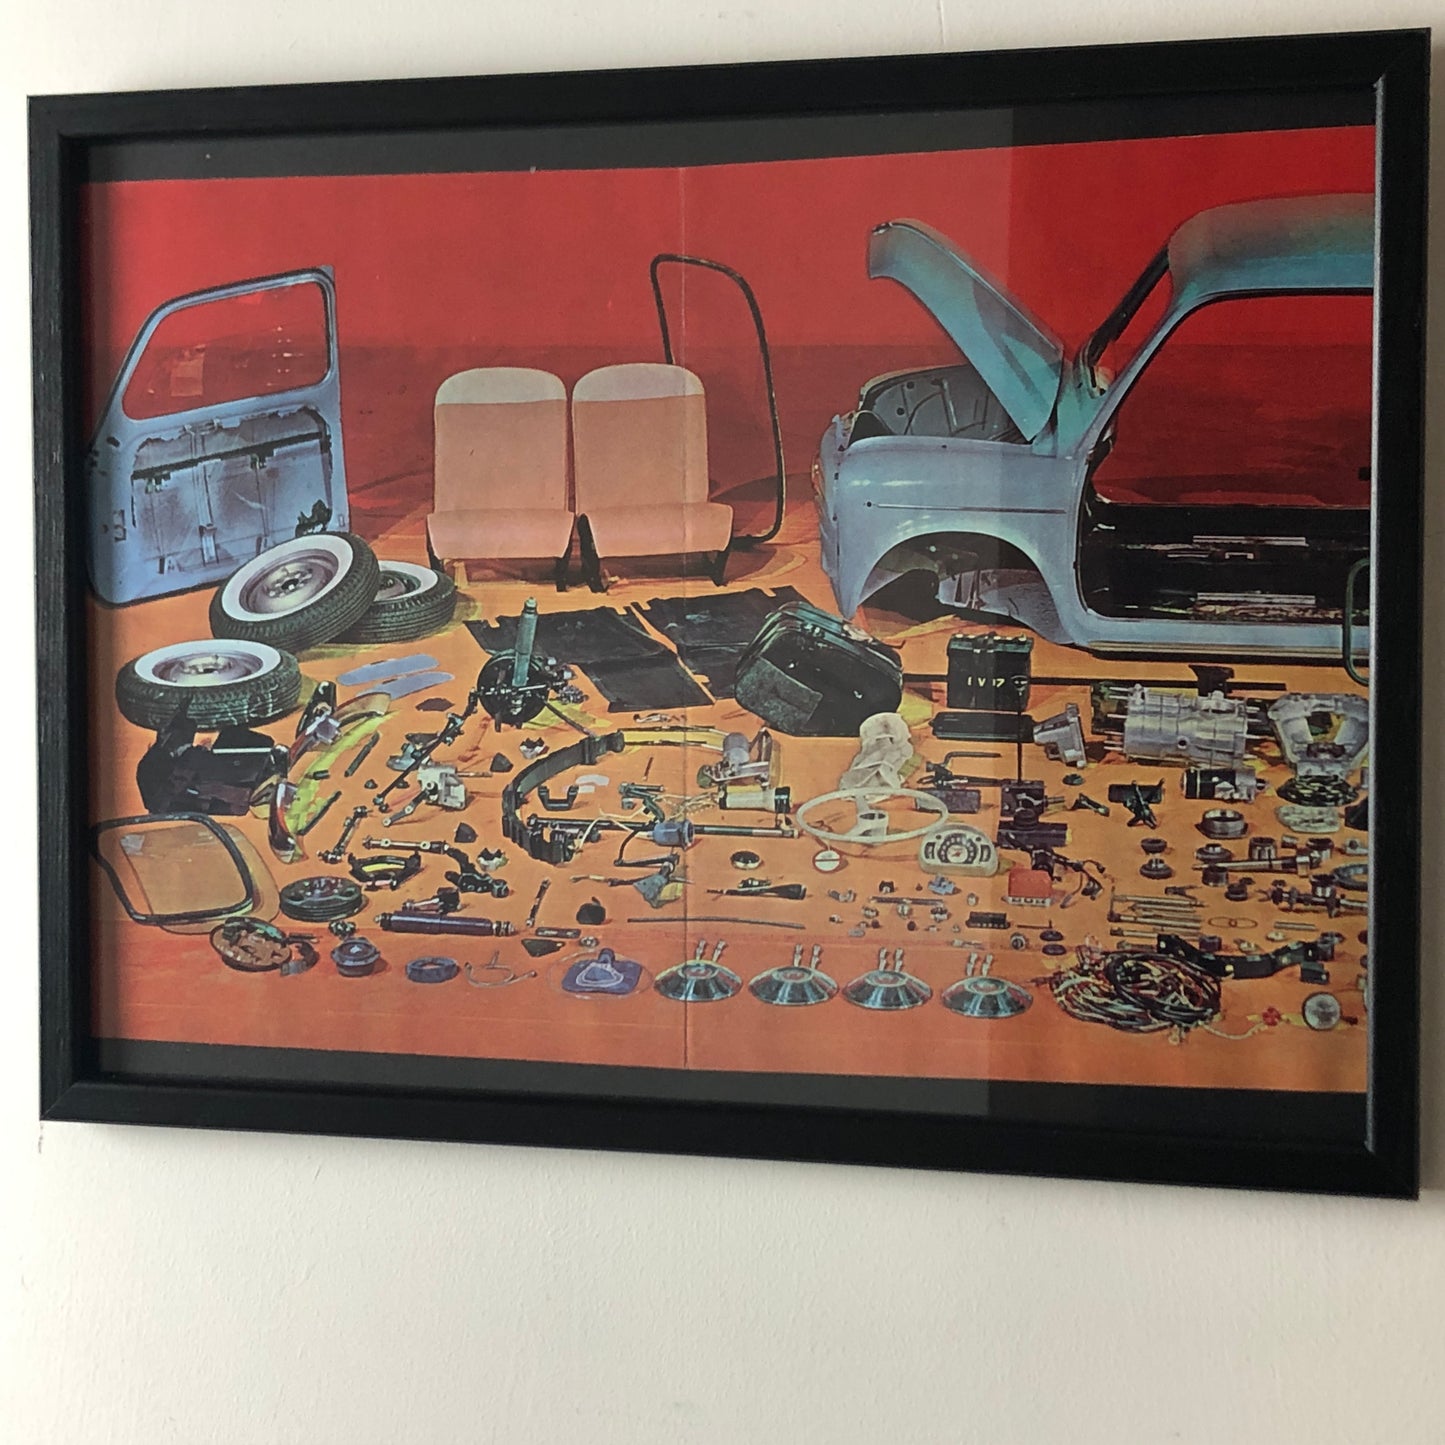 Fiat, Advertising Poster Fiat 600 Disassembled in Pieces